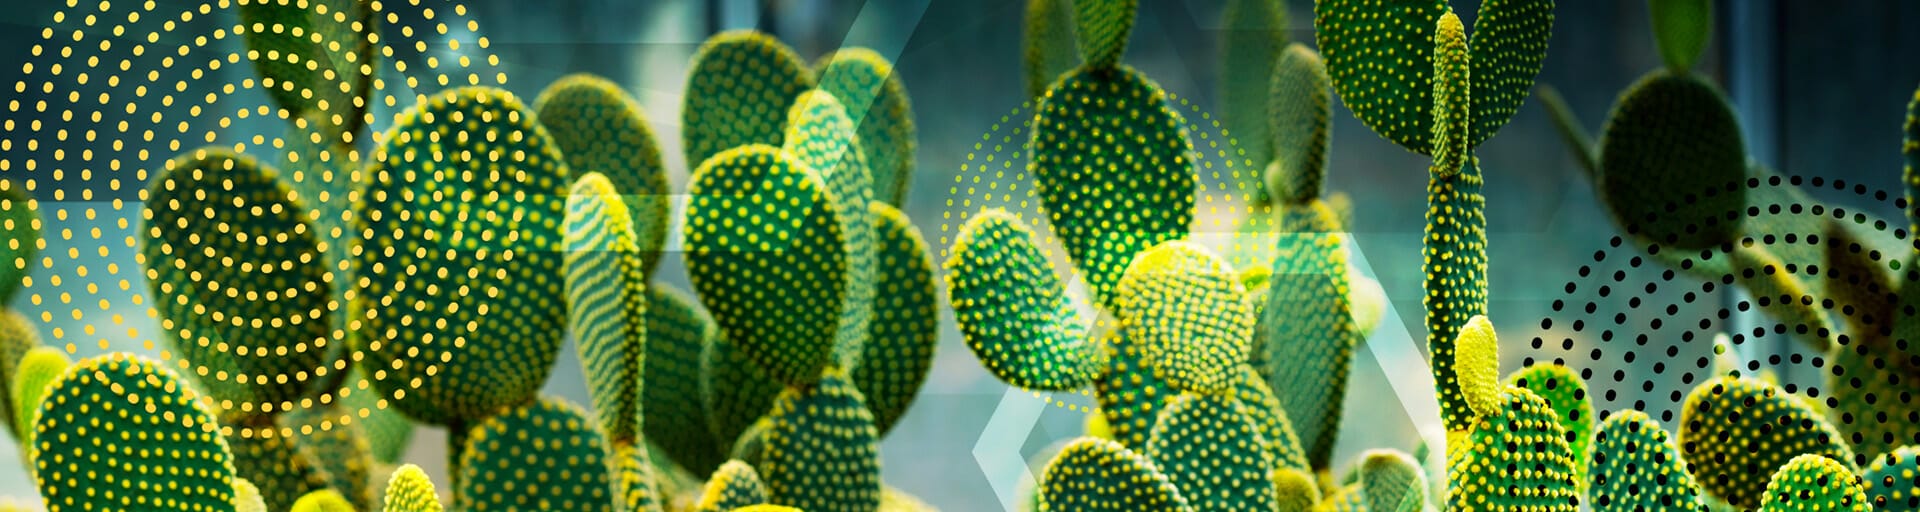 
		beaver tail cactus with abstract image overlay		